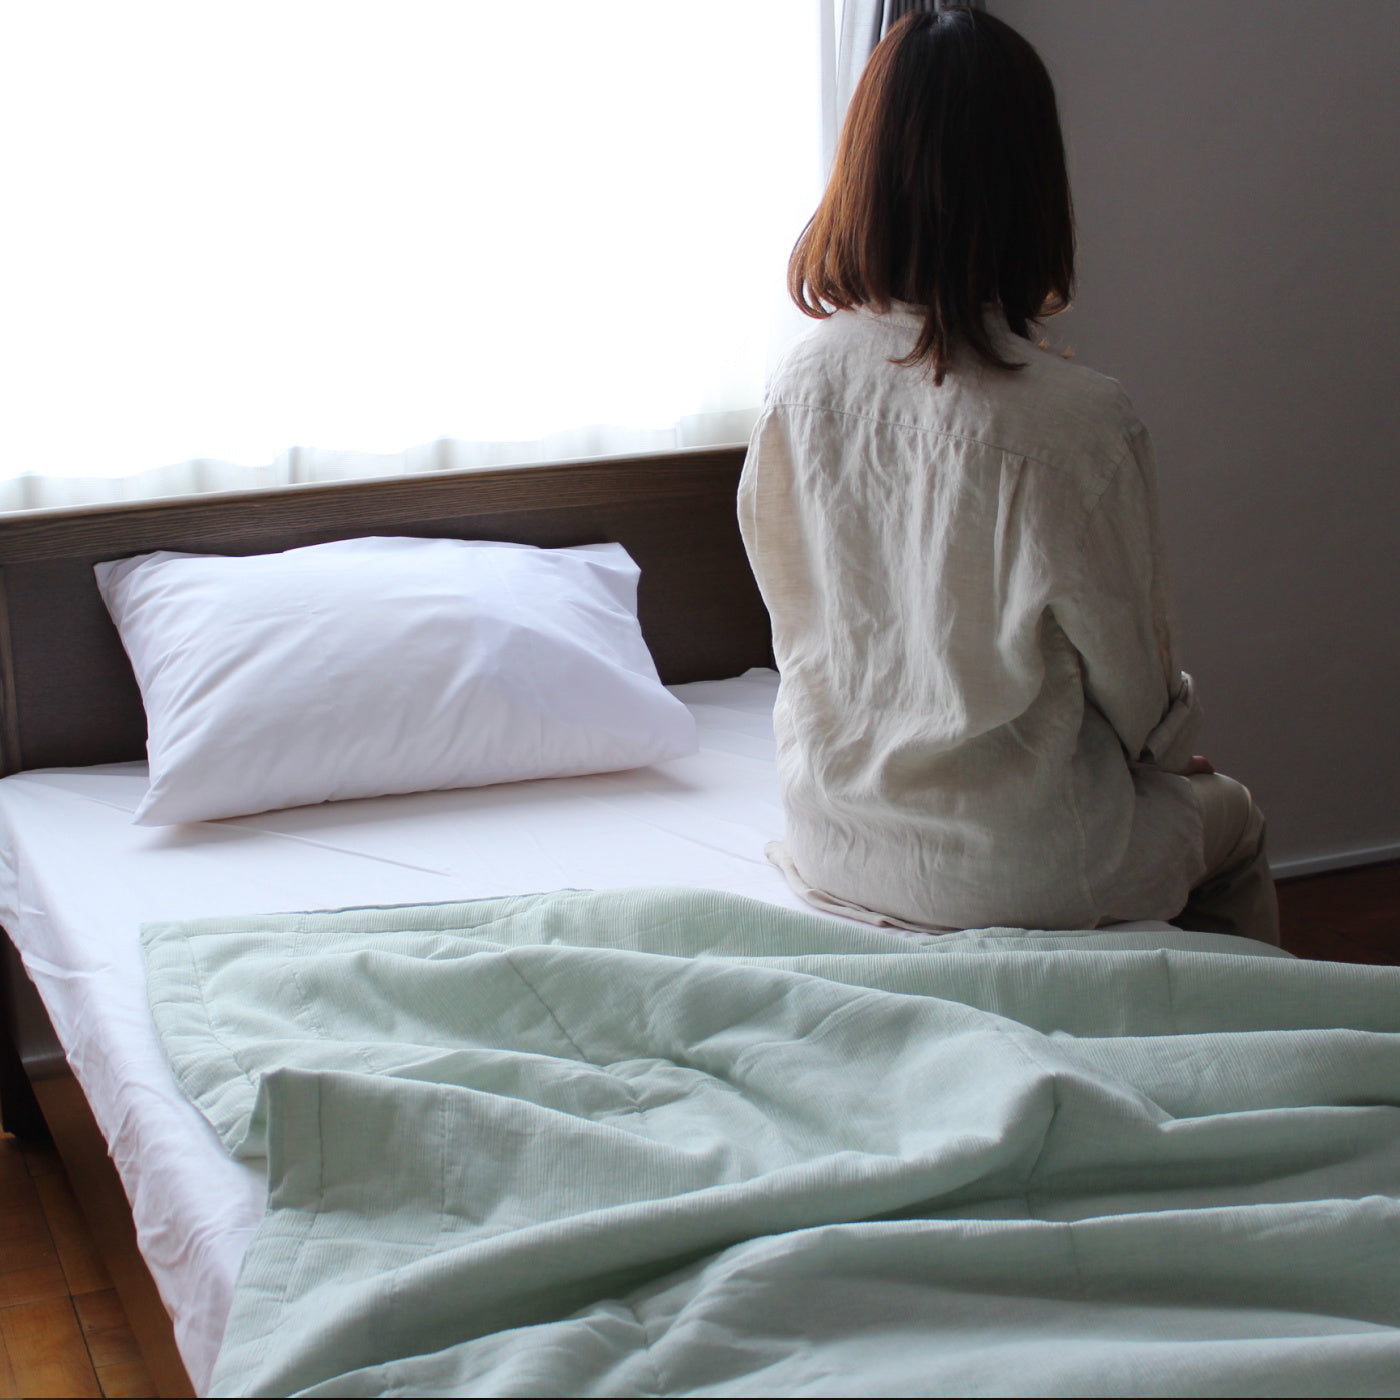 To sleep comfortably during this hot summer, we Japanese think to make our futon smaller (120 x 160 cm) than the regular size. Due to its size, we can put our arms and legs out from the futon to keep our body cooler, but not make our belly cooler by covering it with a futon. 